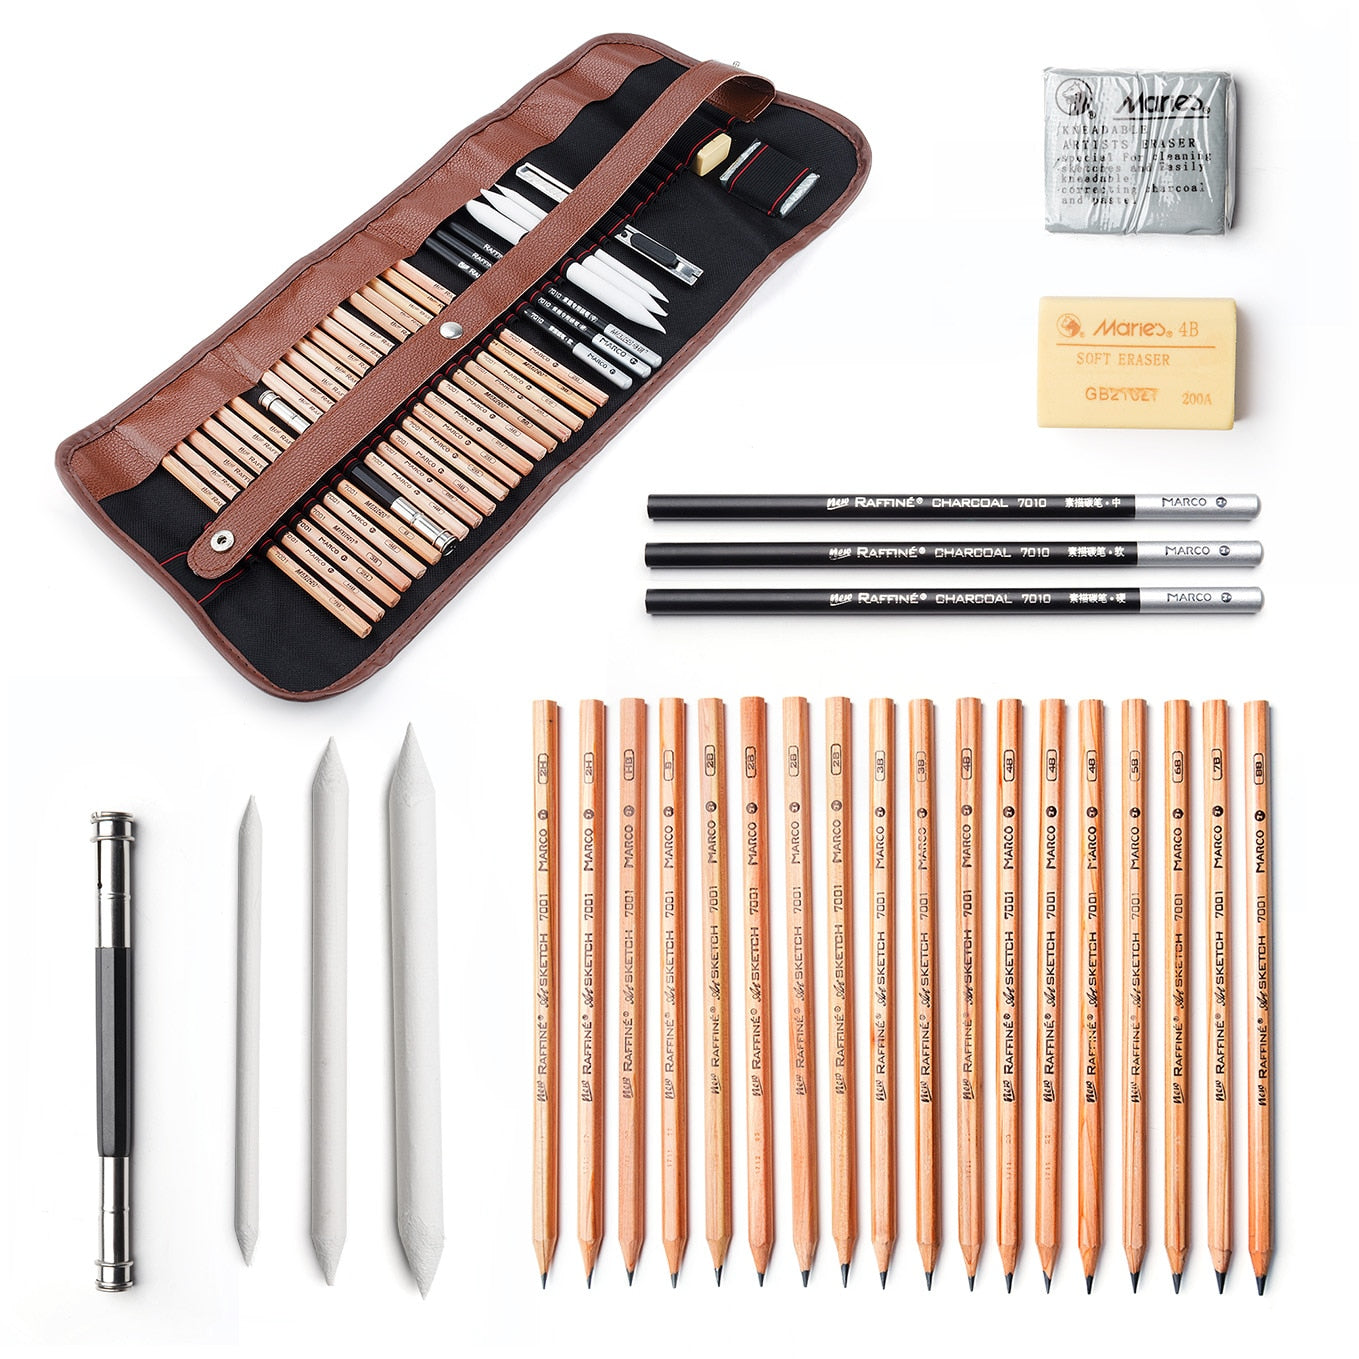 29 Pieces Professional Sketching & Drawing Art Tool Kit With Graphite  Pencils, Charcoal Pencils, Paper Erasable Pen, Craft Knife-Lightwish  (without